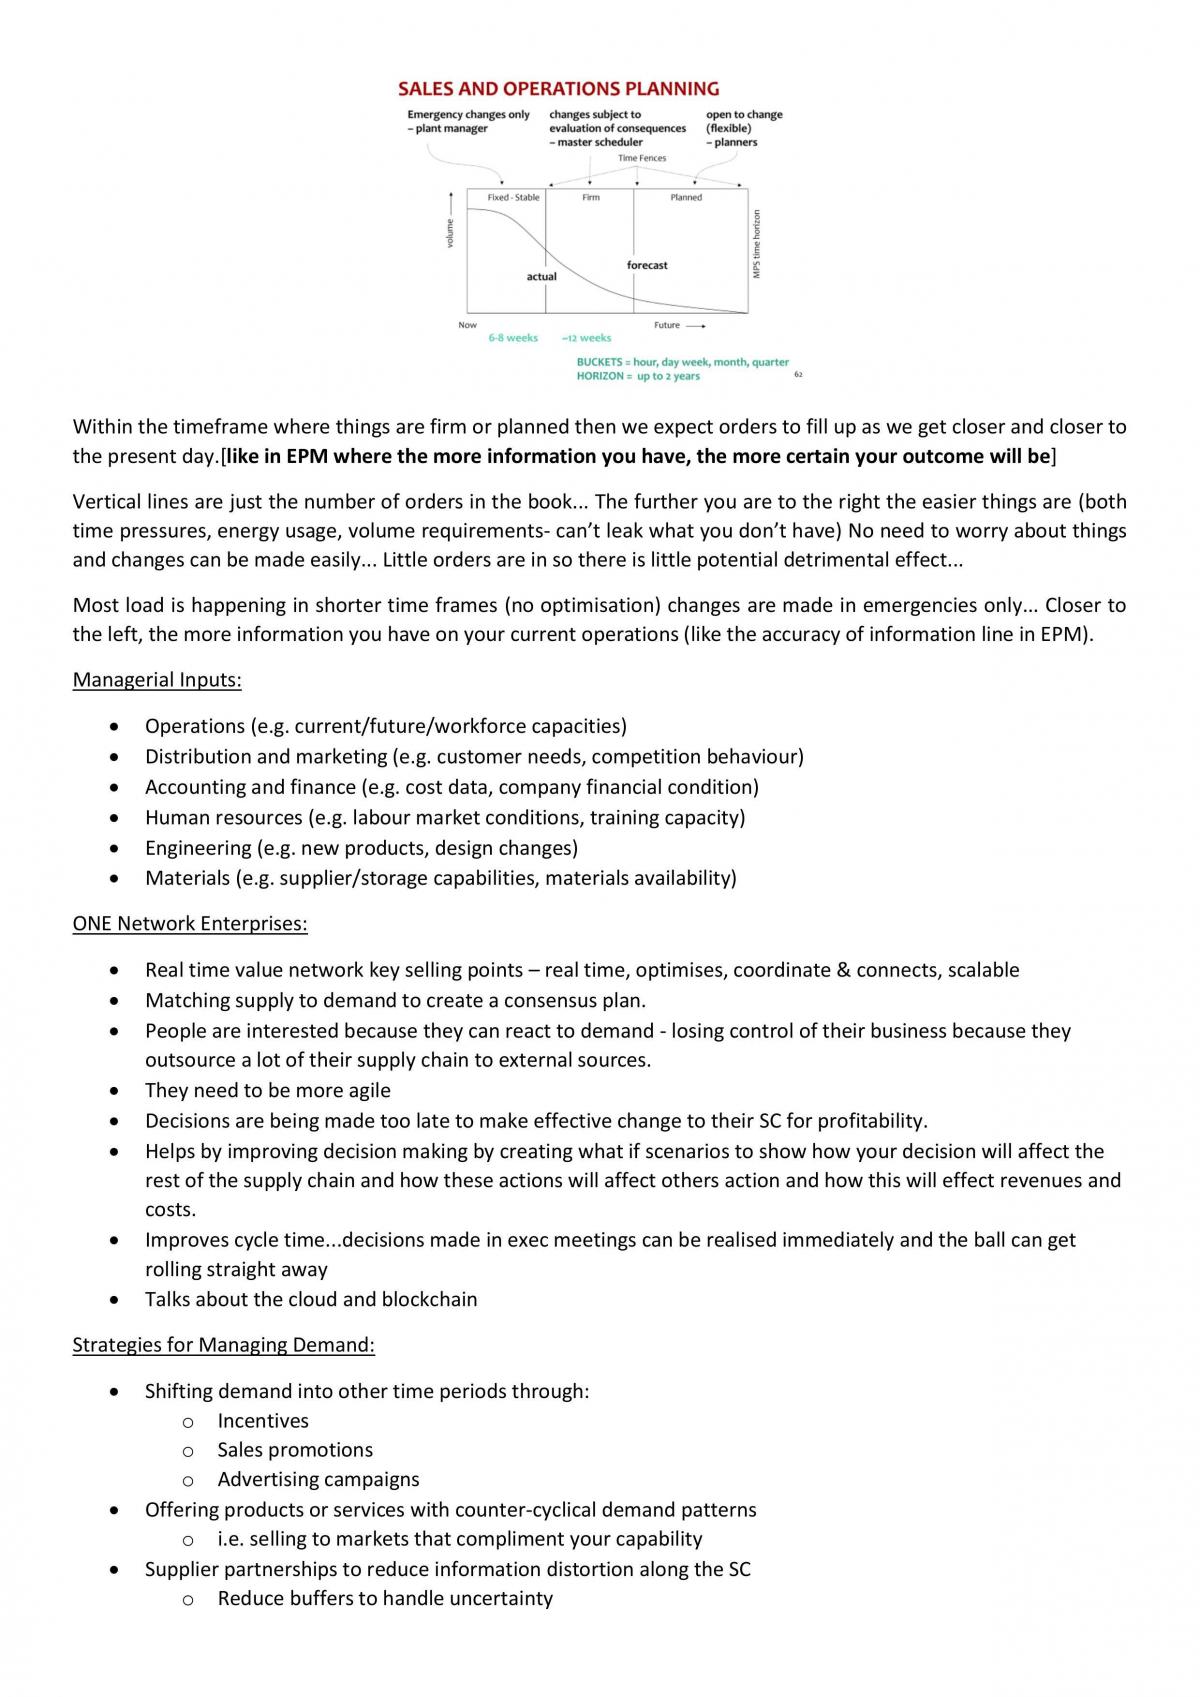 Supply chain management 4 - Summary - Page 20